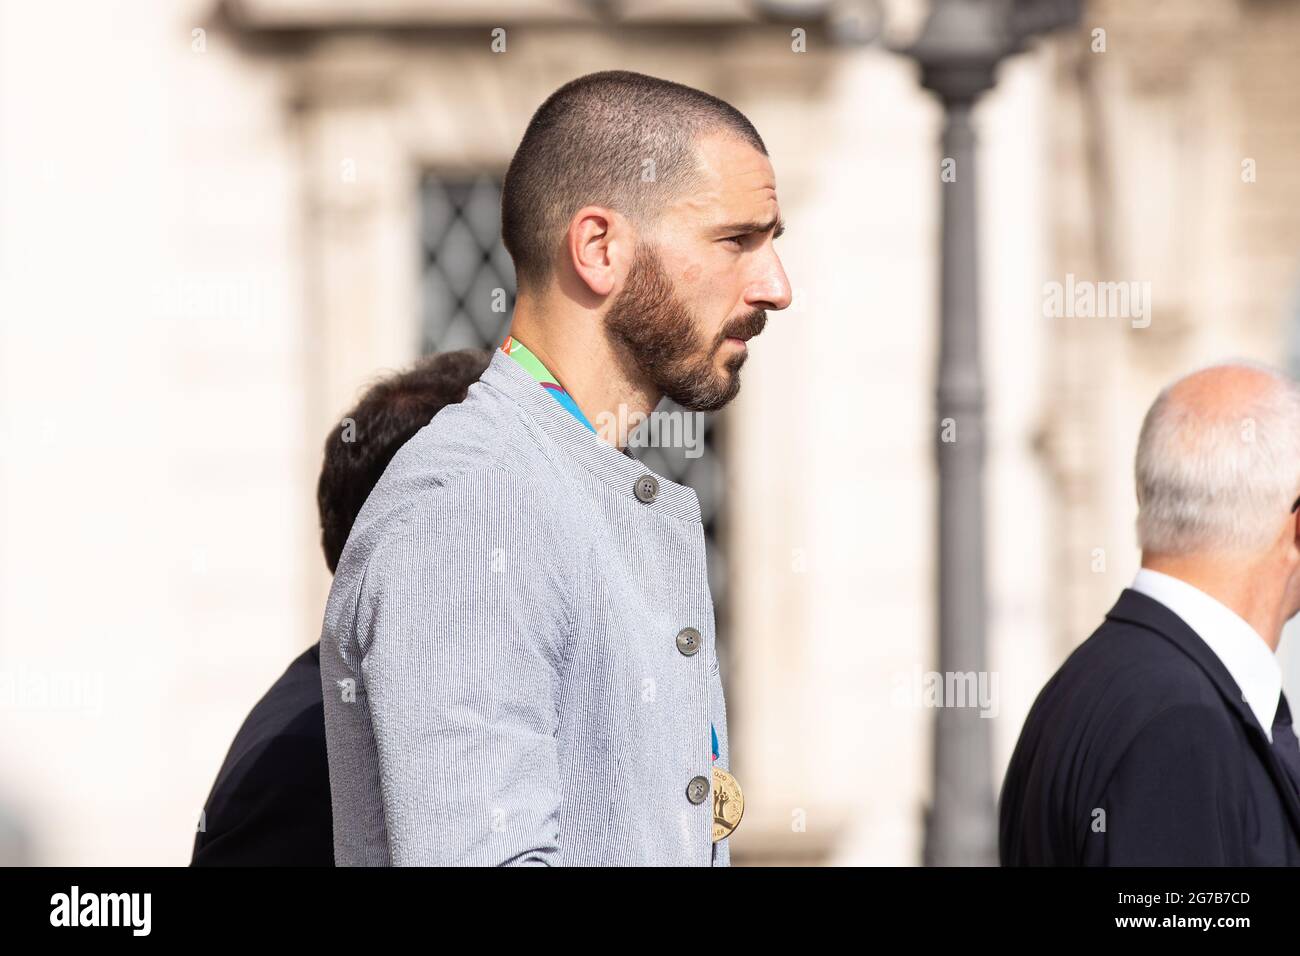 Rome, Italy. 12th July, 2021. Leonardo Bonuccithe player of the Italian National Football Team enter the Quirinal Palace in Rome to visit the President of the Republic Sergio Mattarella after the victory of the European Football Championships, raising the cup won to the sky. The Italian tennis player Matteo Berrettini, finalist at the Wimbledon tournament, also attended the ceremony (Photo by Matteo Nardone/Pacific Press/Sipa USA) Credit: Sipa USA/Alamy Live News Stock Photo